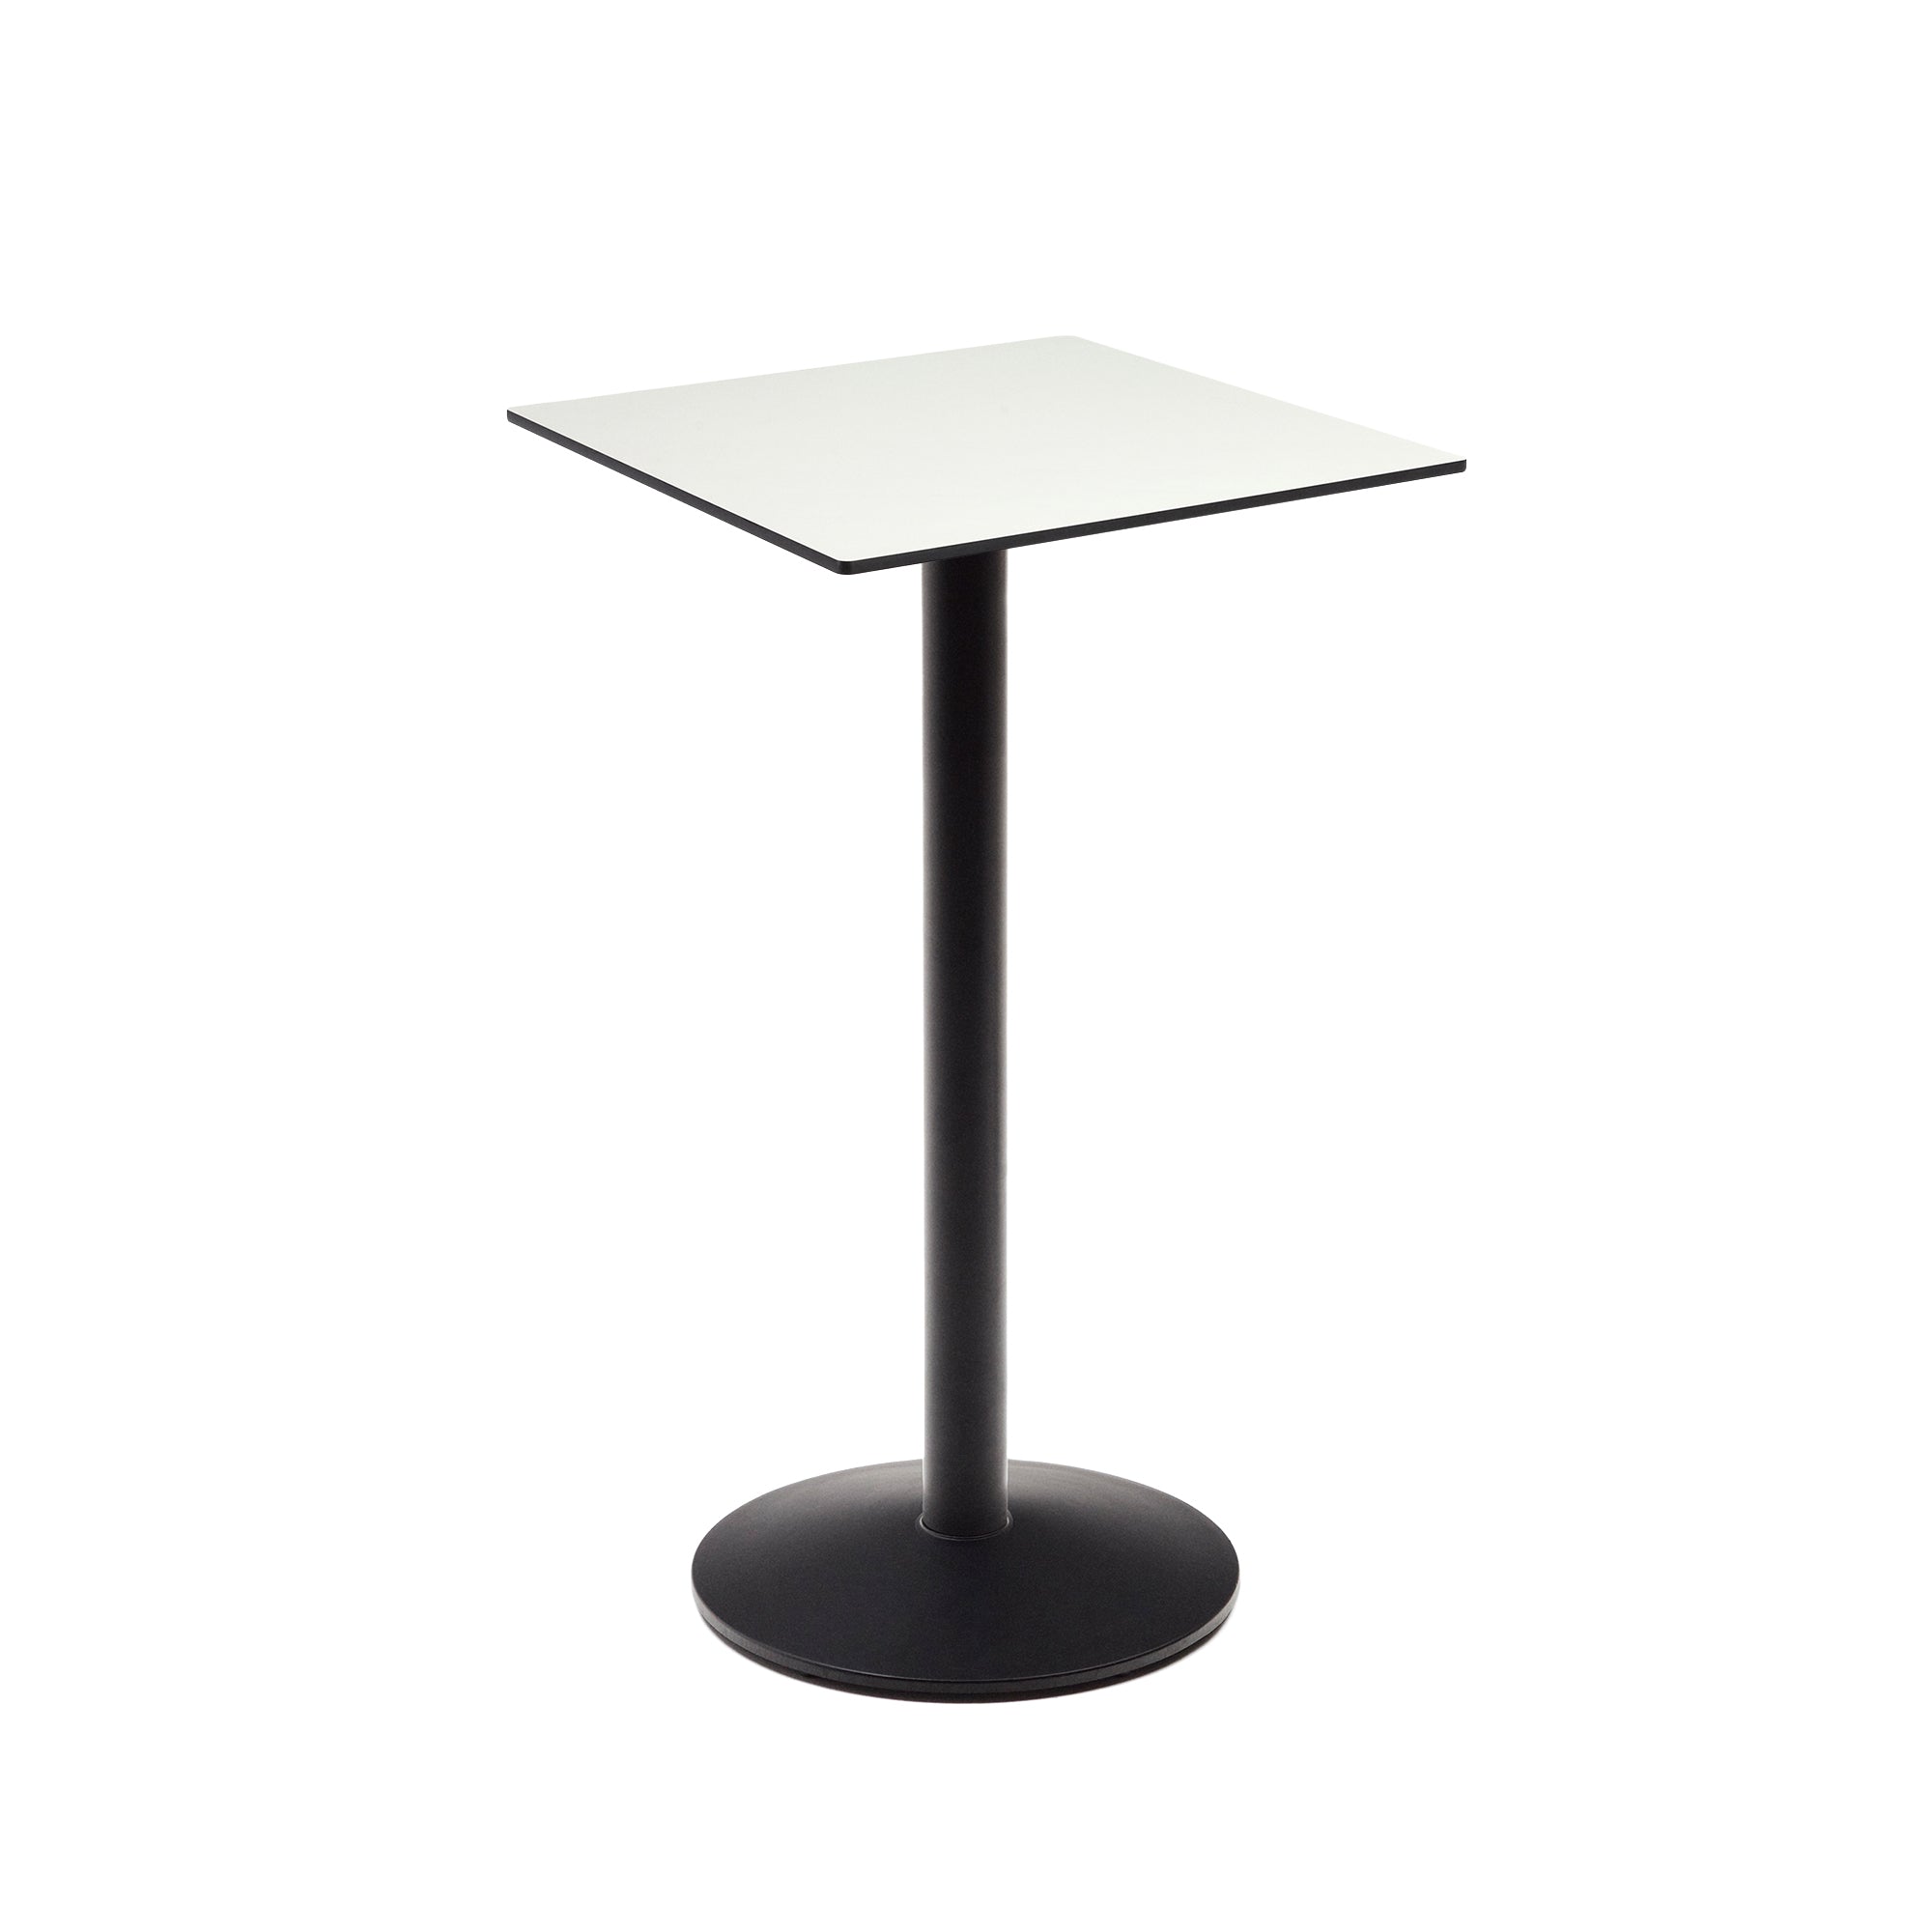 Esilda high table in white with metal leg in a painted black finish, 60 x 60 x 96 cm